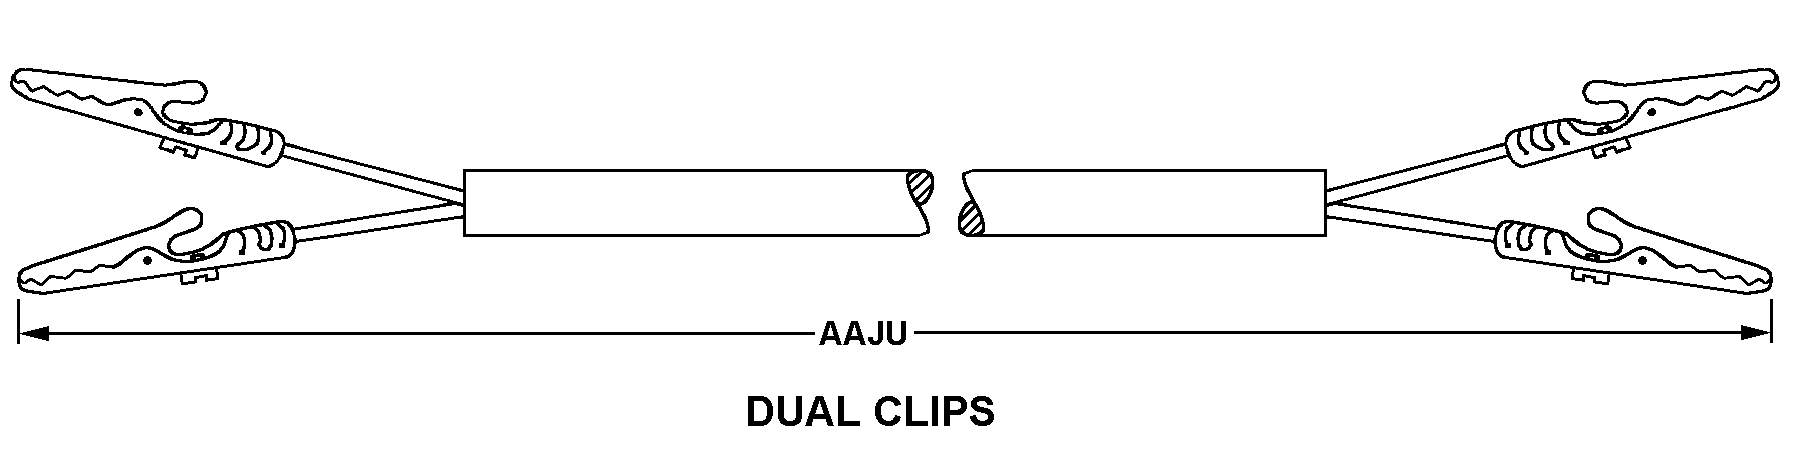 DUAL CLIPS style nsn 6020-01-588-9135